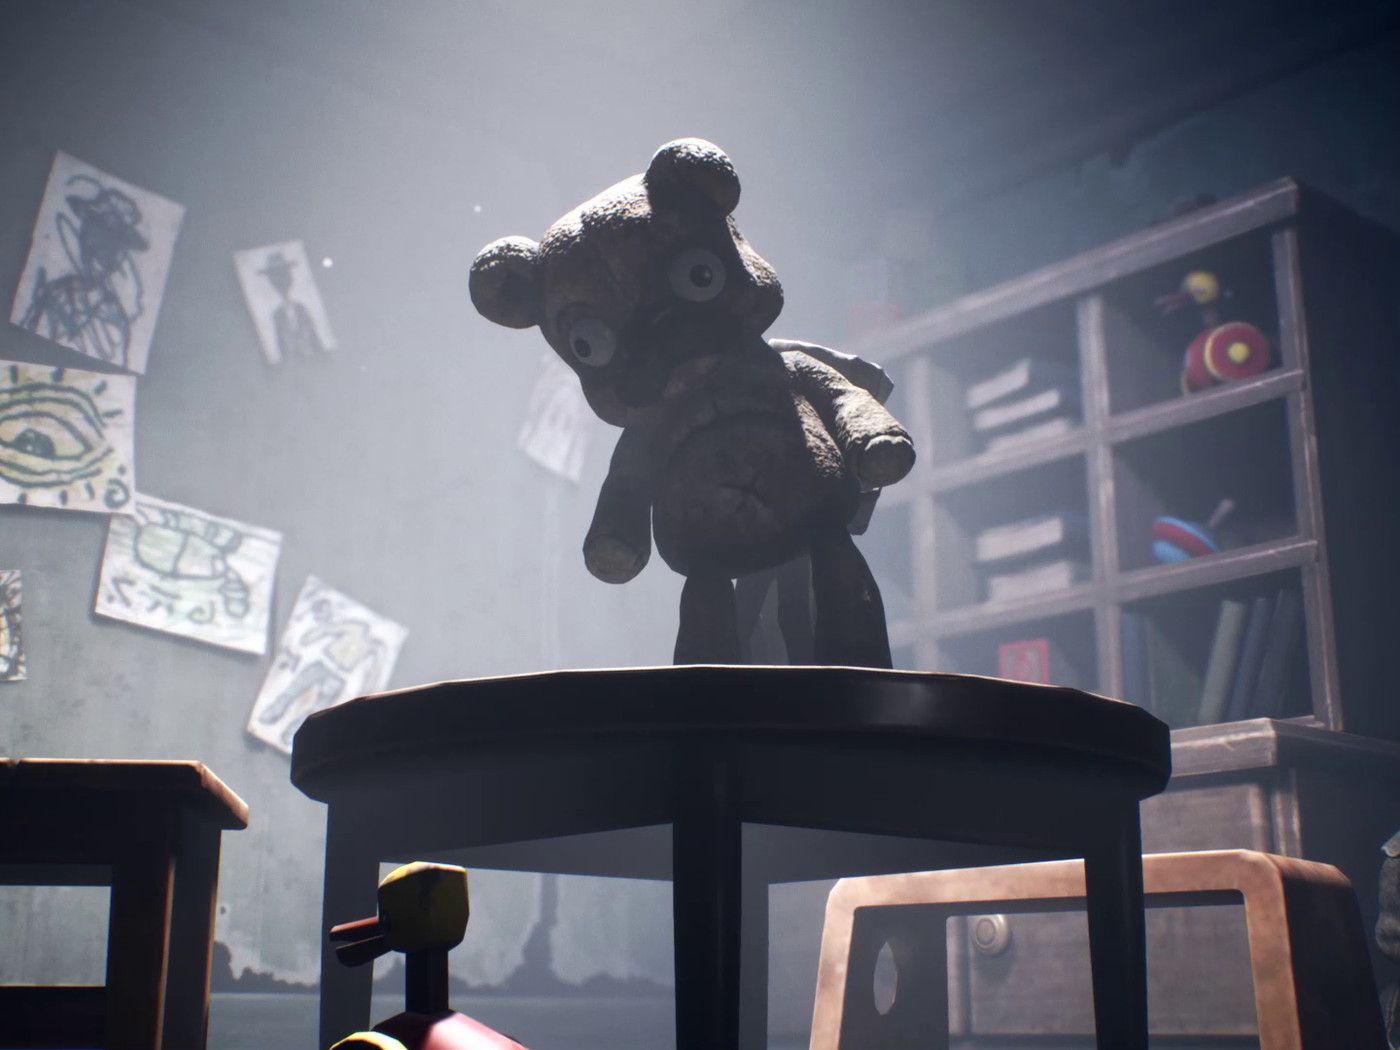 Little Nightmares 2 review: A horrifying sequel that sometimes loses its way